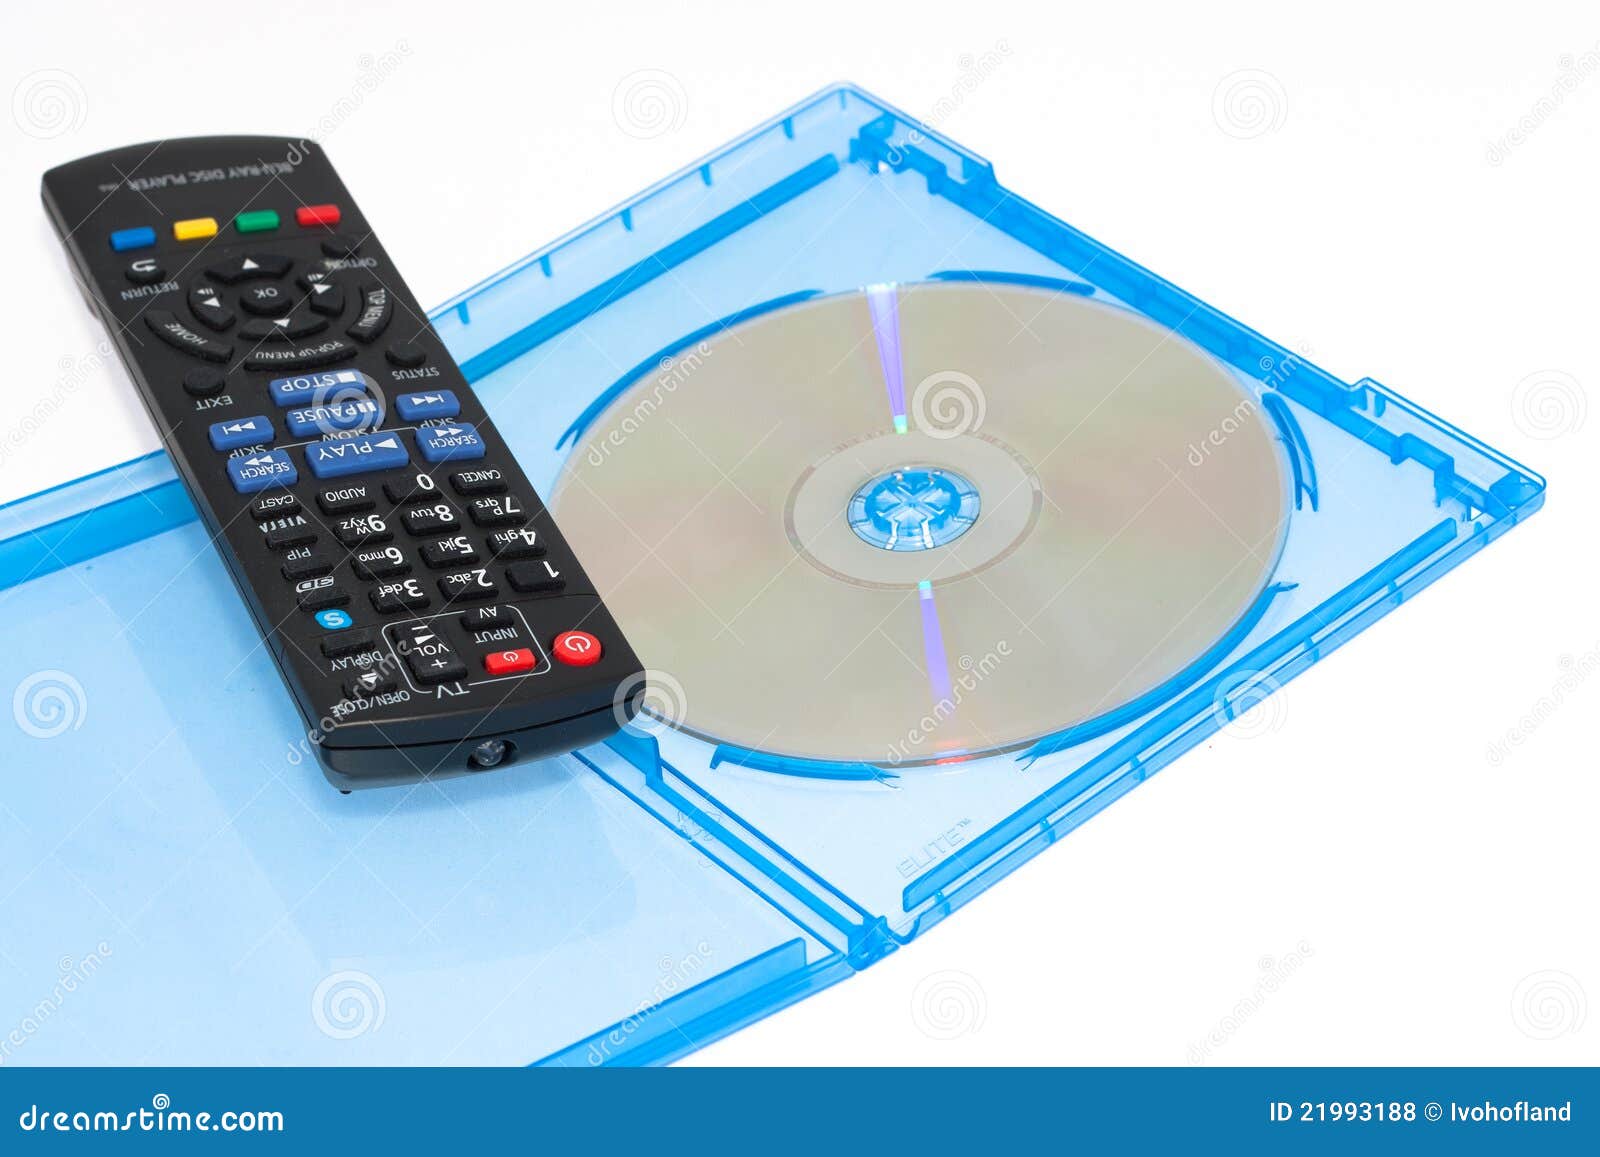 remote control with blu-ray disc movie